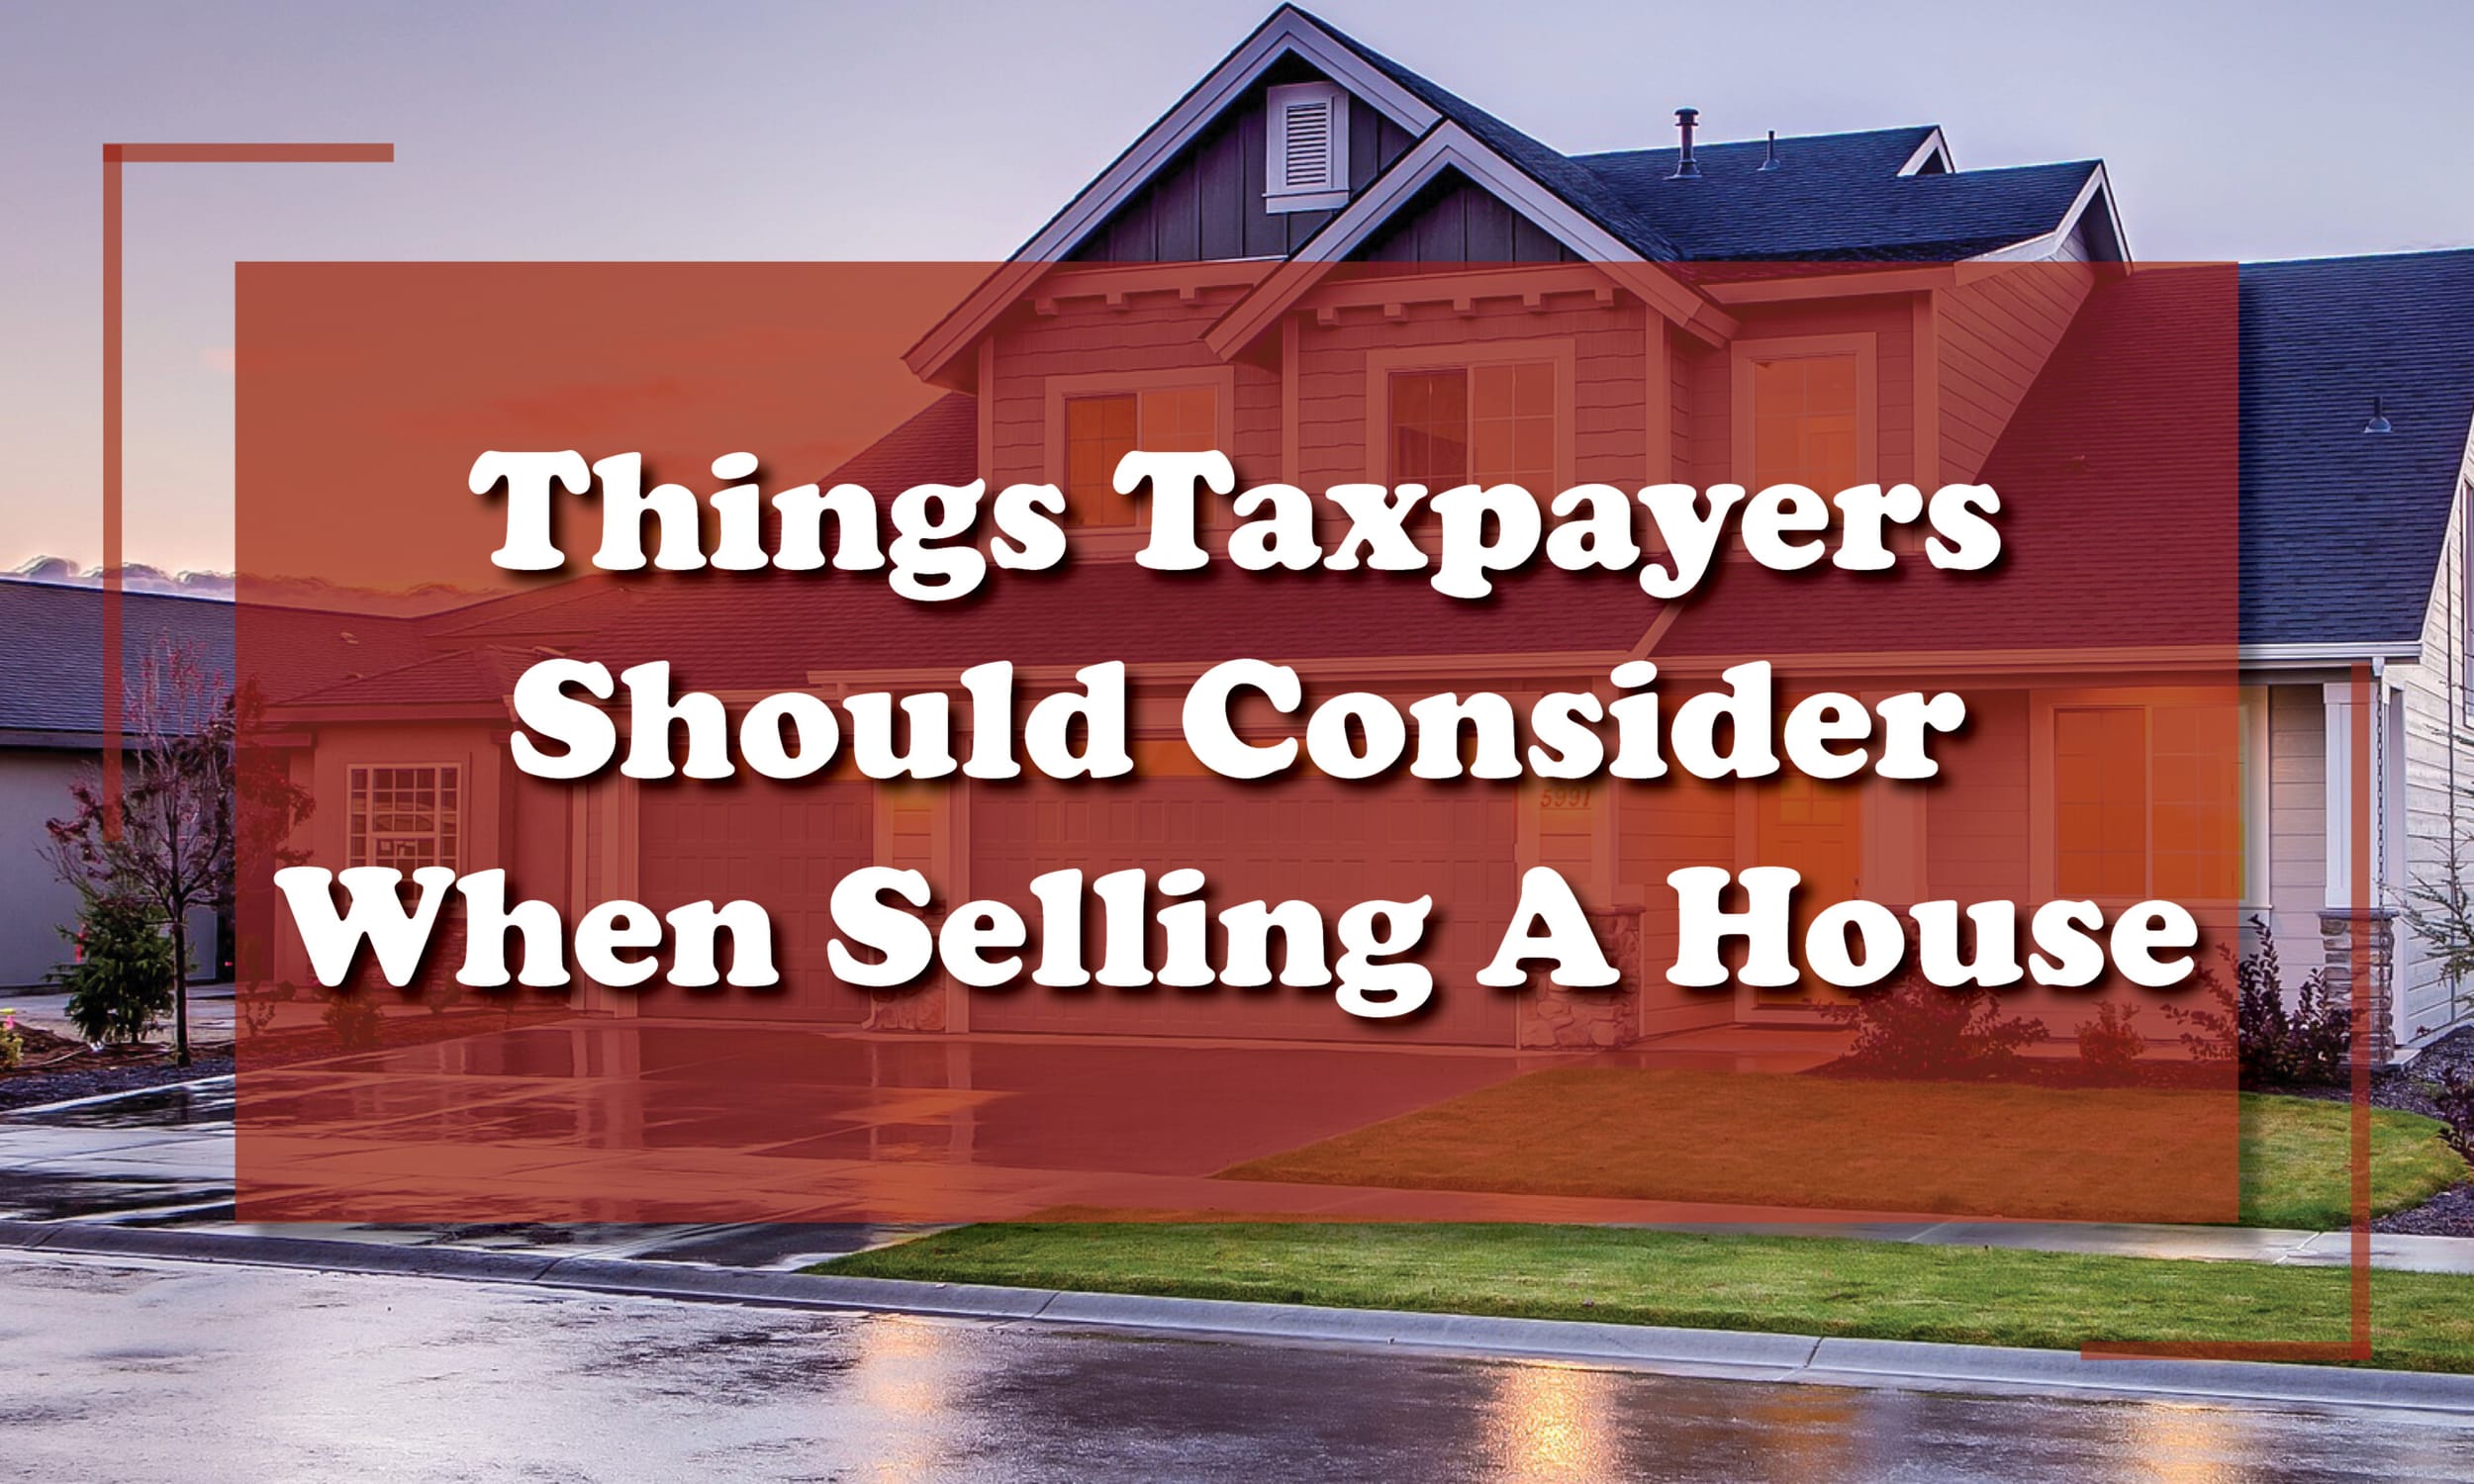 Things taxpayers should consider when selling a house